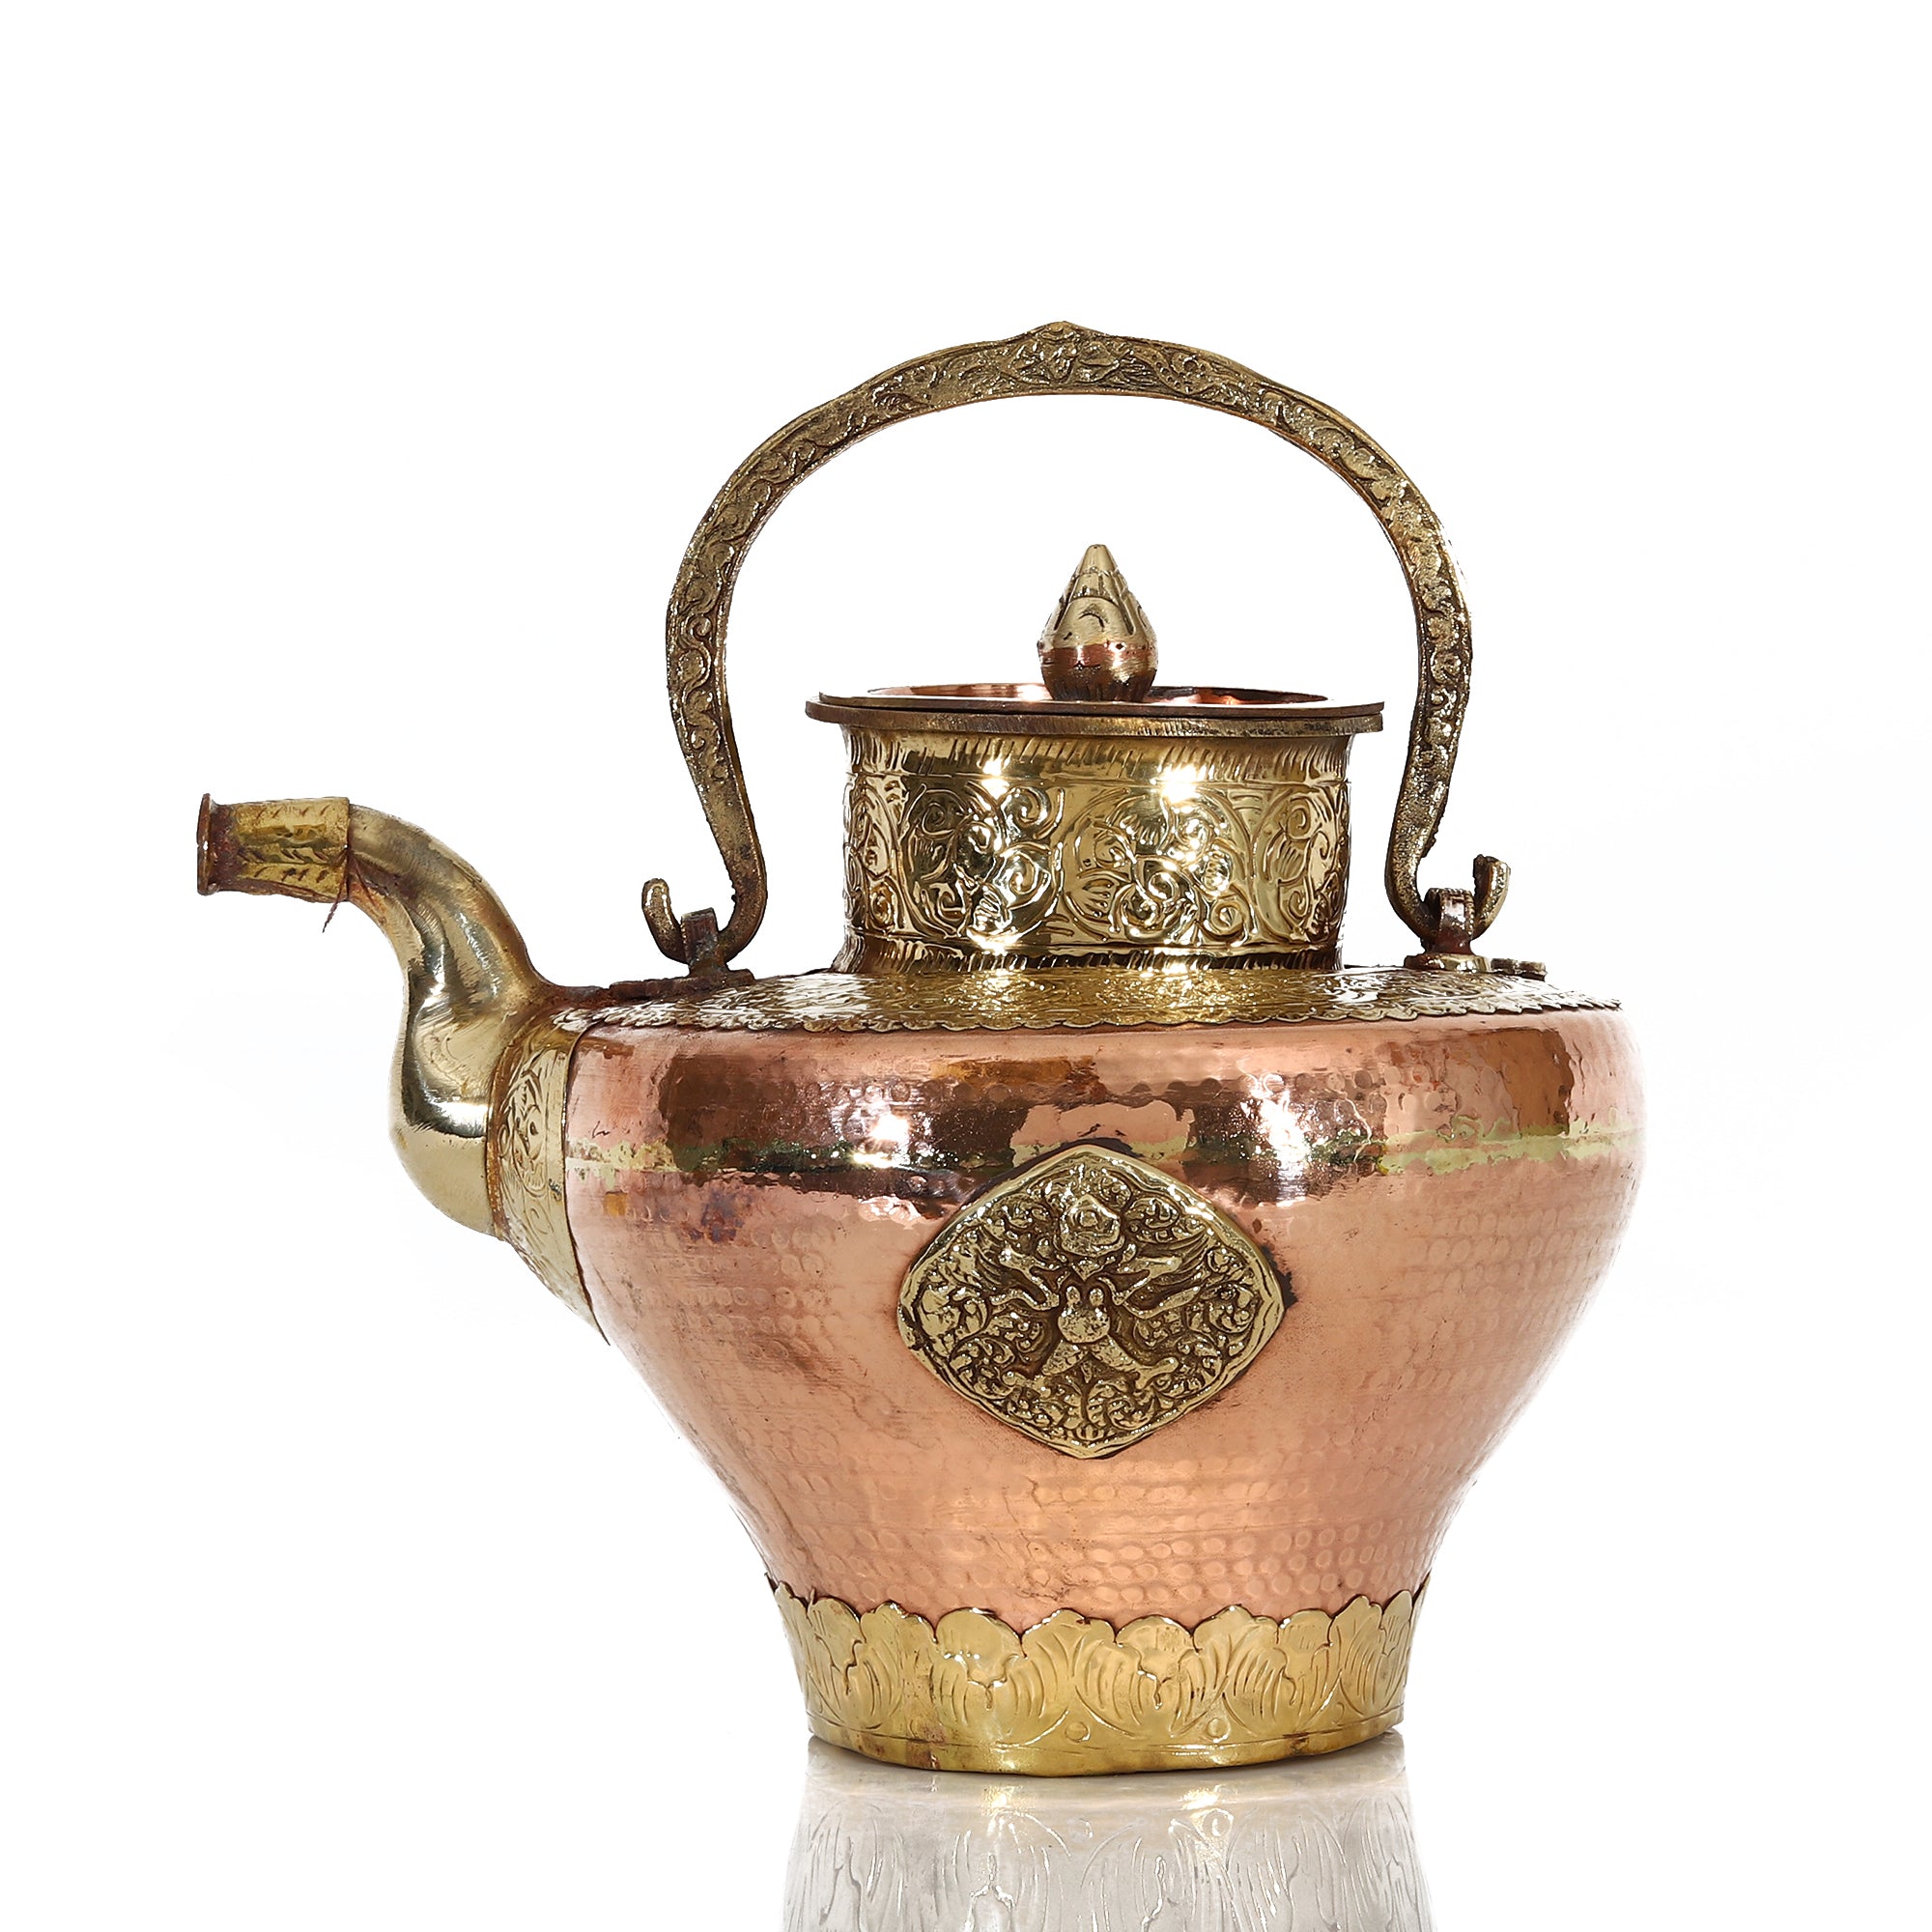 Copper & Brass Teapot With Embossed Design & Chain